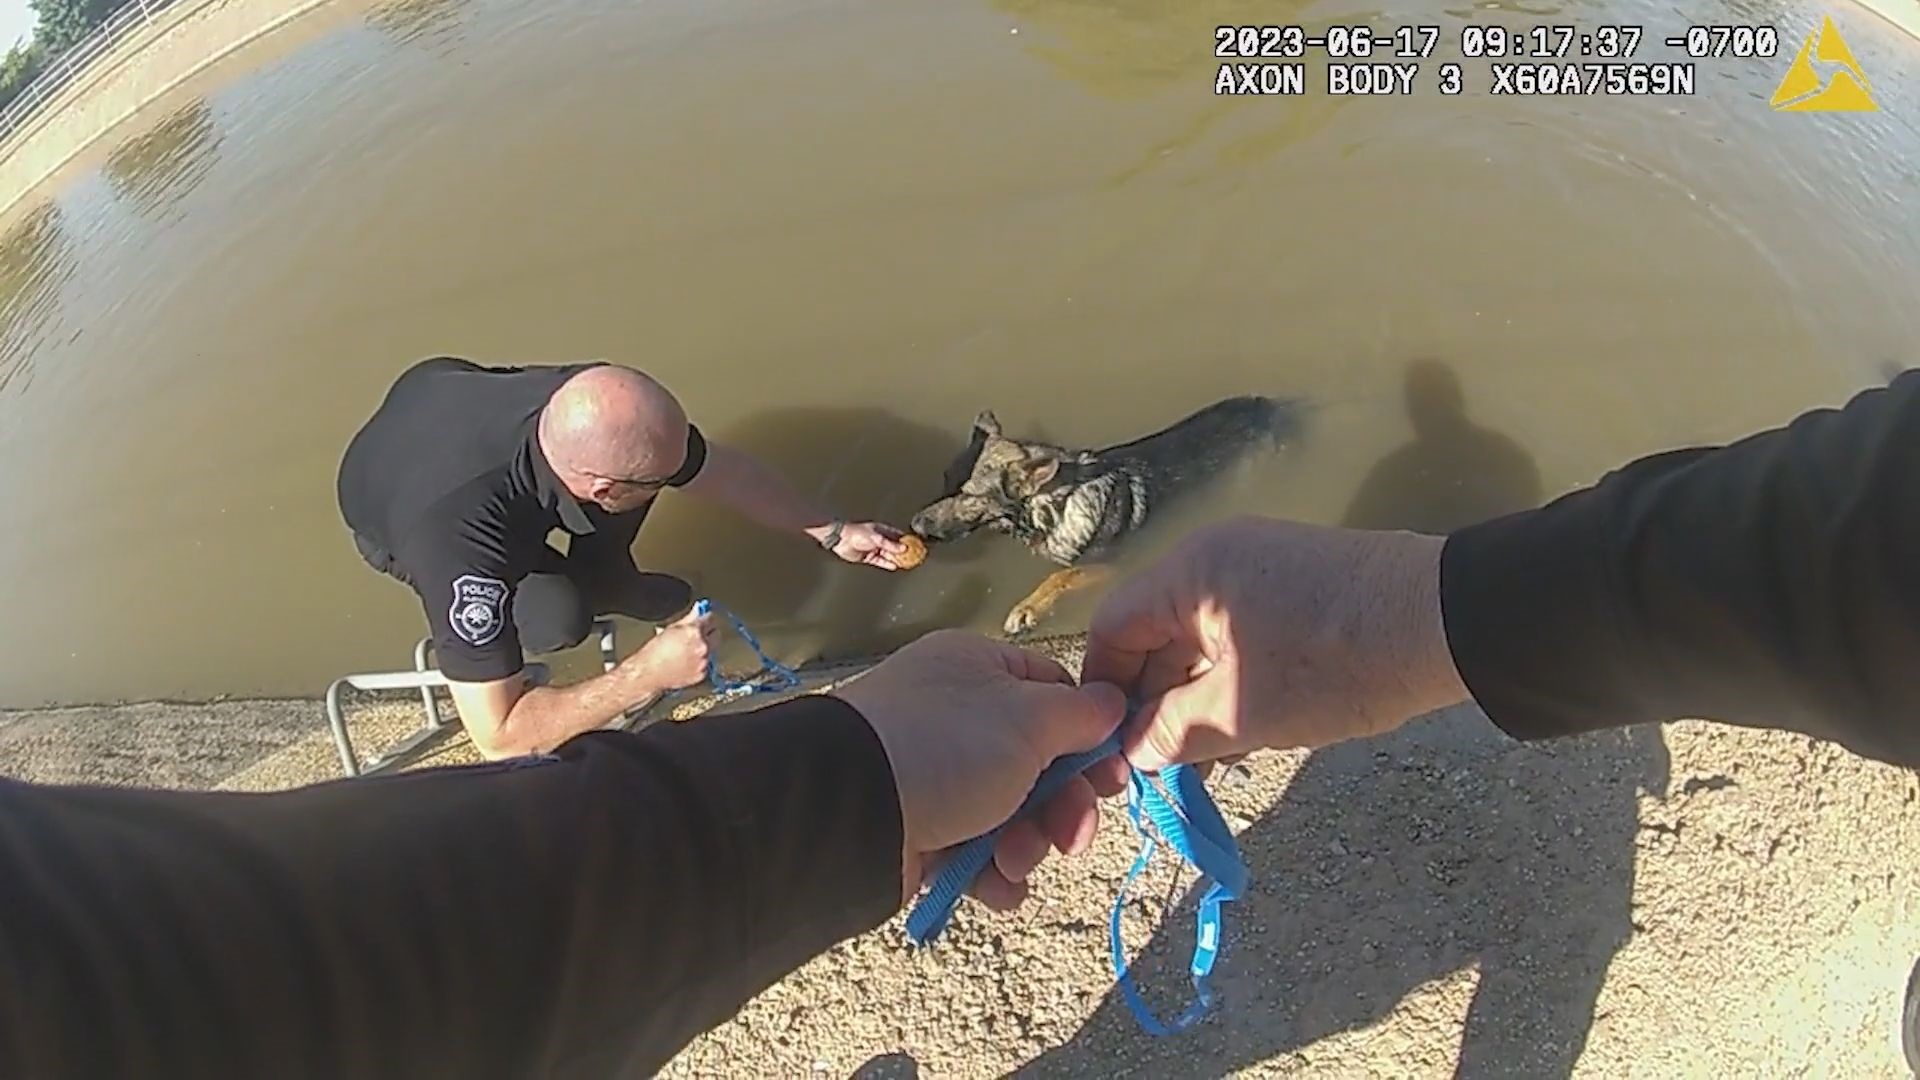 A dog was seen in the canal with no way of escape, so some nearby officers jumped in to help.